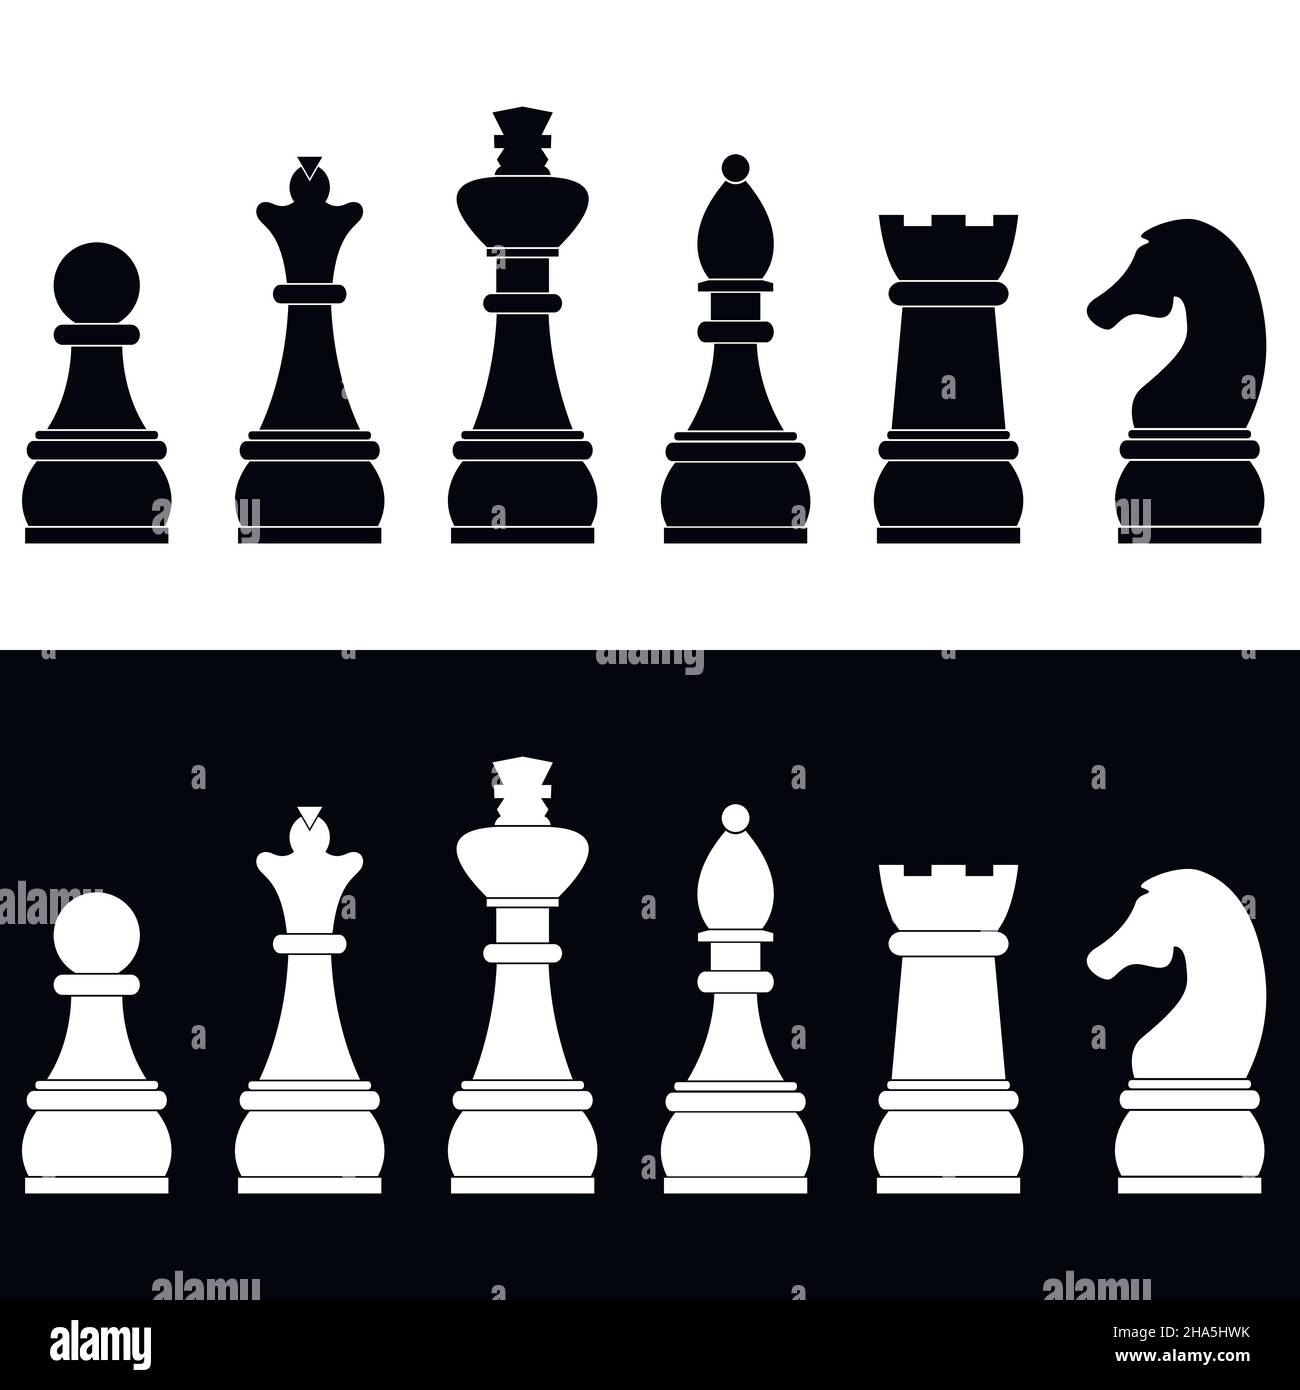 Chess piece name set stock vector. Illustration of flat - 100792310